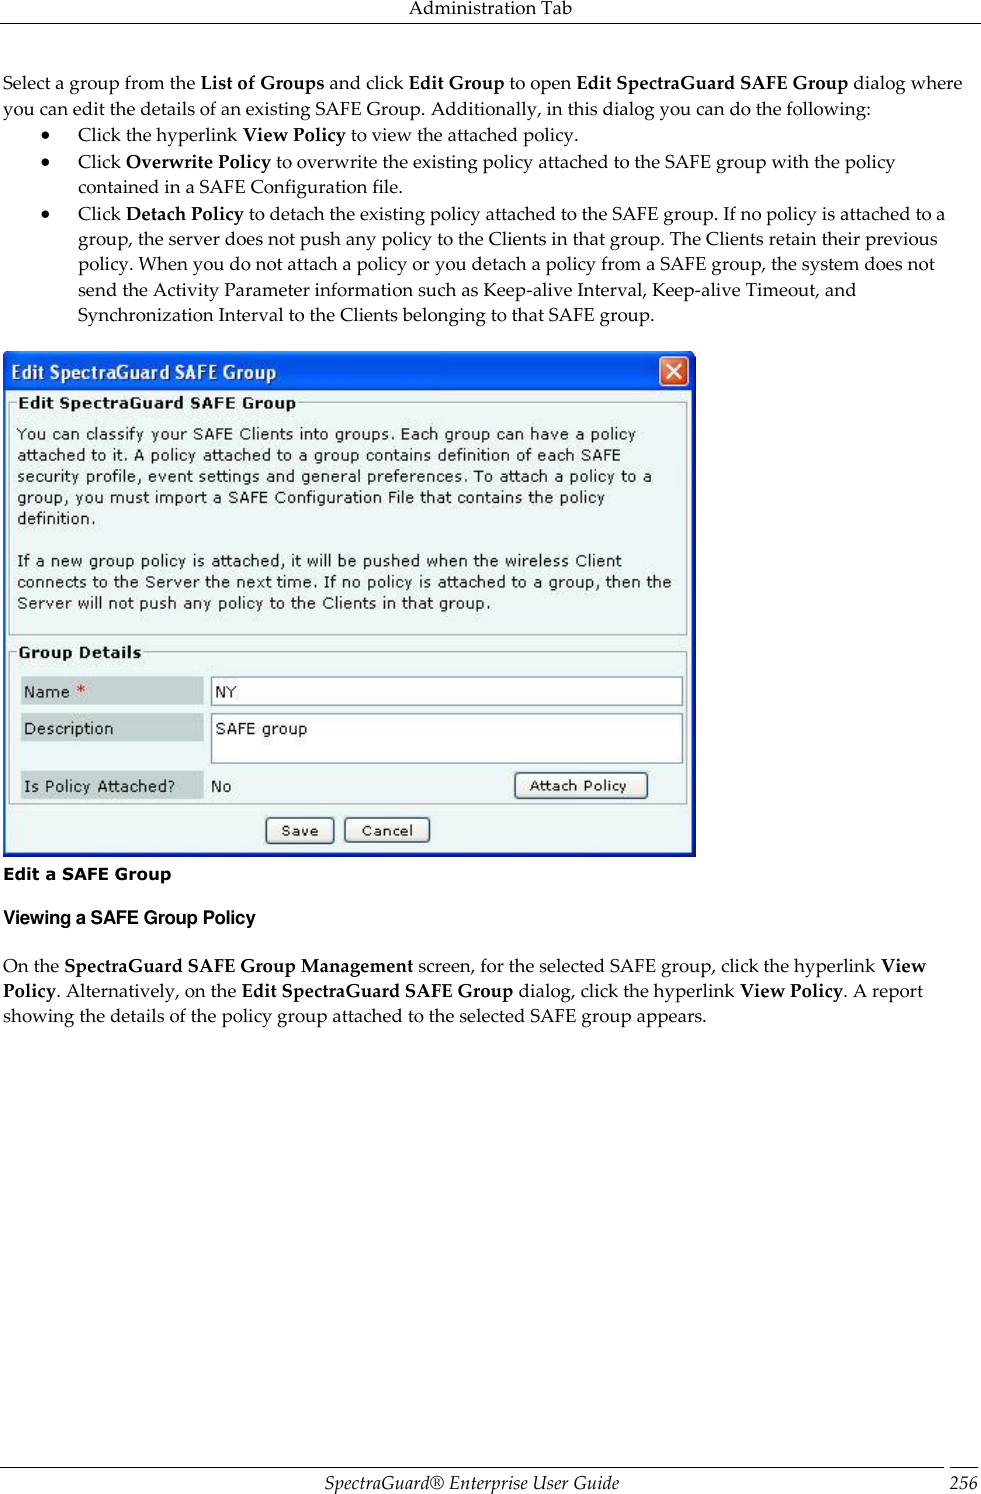 Administration Tab SpectraGuard®  Enterprise User Guide 256 Select a group from the List of Groups and click Edit Group to open Edit SpectraGuard SAFE Group dialog where you can edit the details of an existing SAFE Group. Additionally, in this dialog you can do the following:  Click the hyperlink View Policy to view the attached policy.  Click Overwrite Policy to overwrite the existing policy attached to the SAFE group with the policy contained in a SAFE Configuration file.  Click Detach Policy to detach the existing policy attached to the SAFE group. If no policy is attached to a group, the server does not push any policy to the Clients in that group. The Clients retain their previous policy. When you do not attach a policy or you detach a policy from a SAFE group, the system does not send the Activity Parameter information such as Keep-alive Interval, Keep-alive Timeout, and Synchronization Interval to the Clients belonging to that SAFE group.    Edit a SAFE Group Viewing a SAFE Group Policy On the SpectraGuard SAFE Group Management screen, for the selected SAFE group, click the hyperlink View Policy. Alternatively, on the Edit SpectraGuard SAFE Group dialog, click the hyperlink View Policy. A report showing the details of the policy group attached to the selected SAFE group appears.   